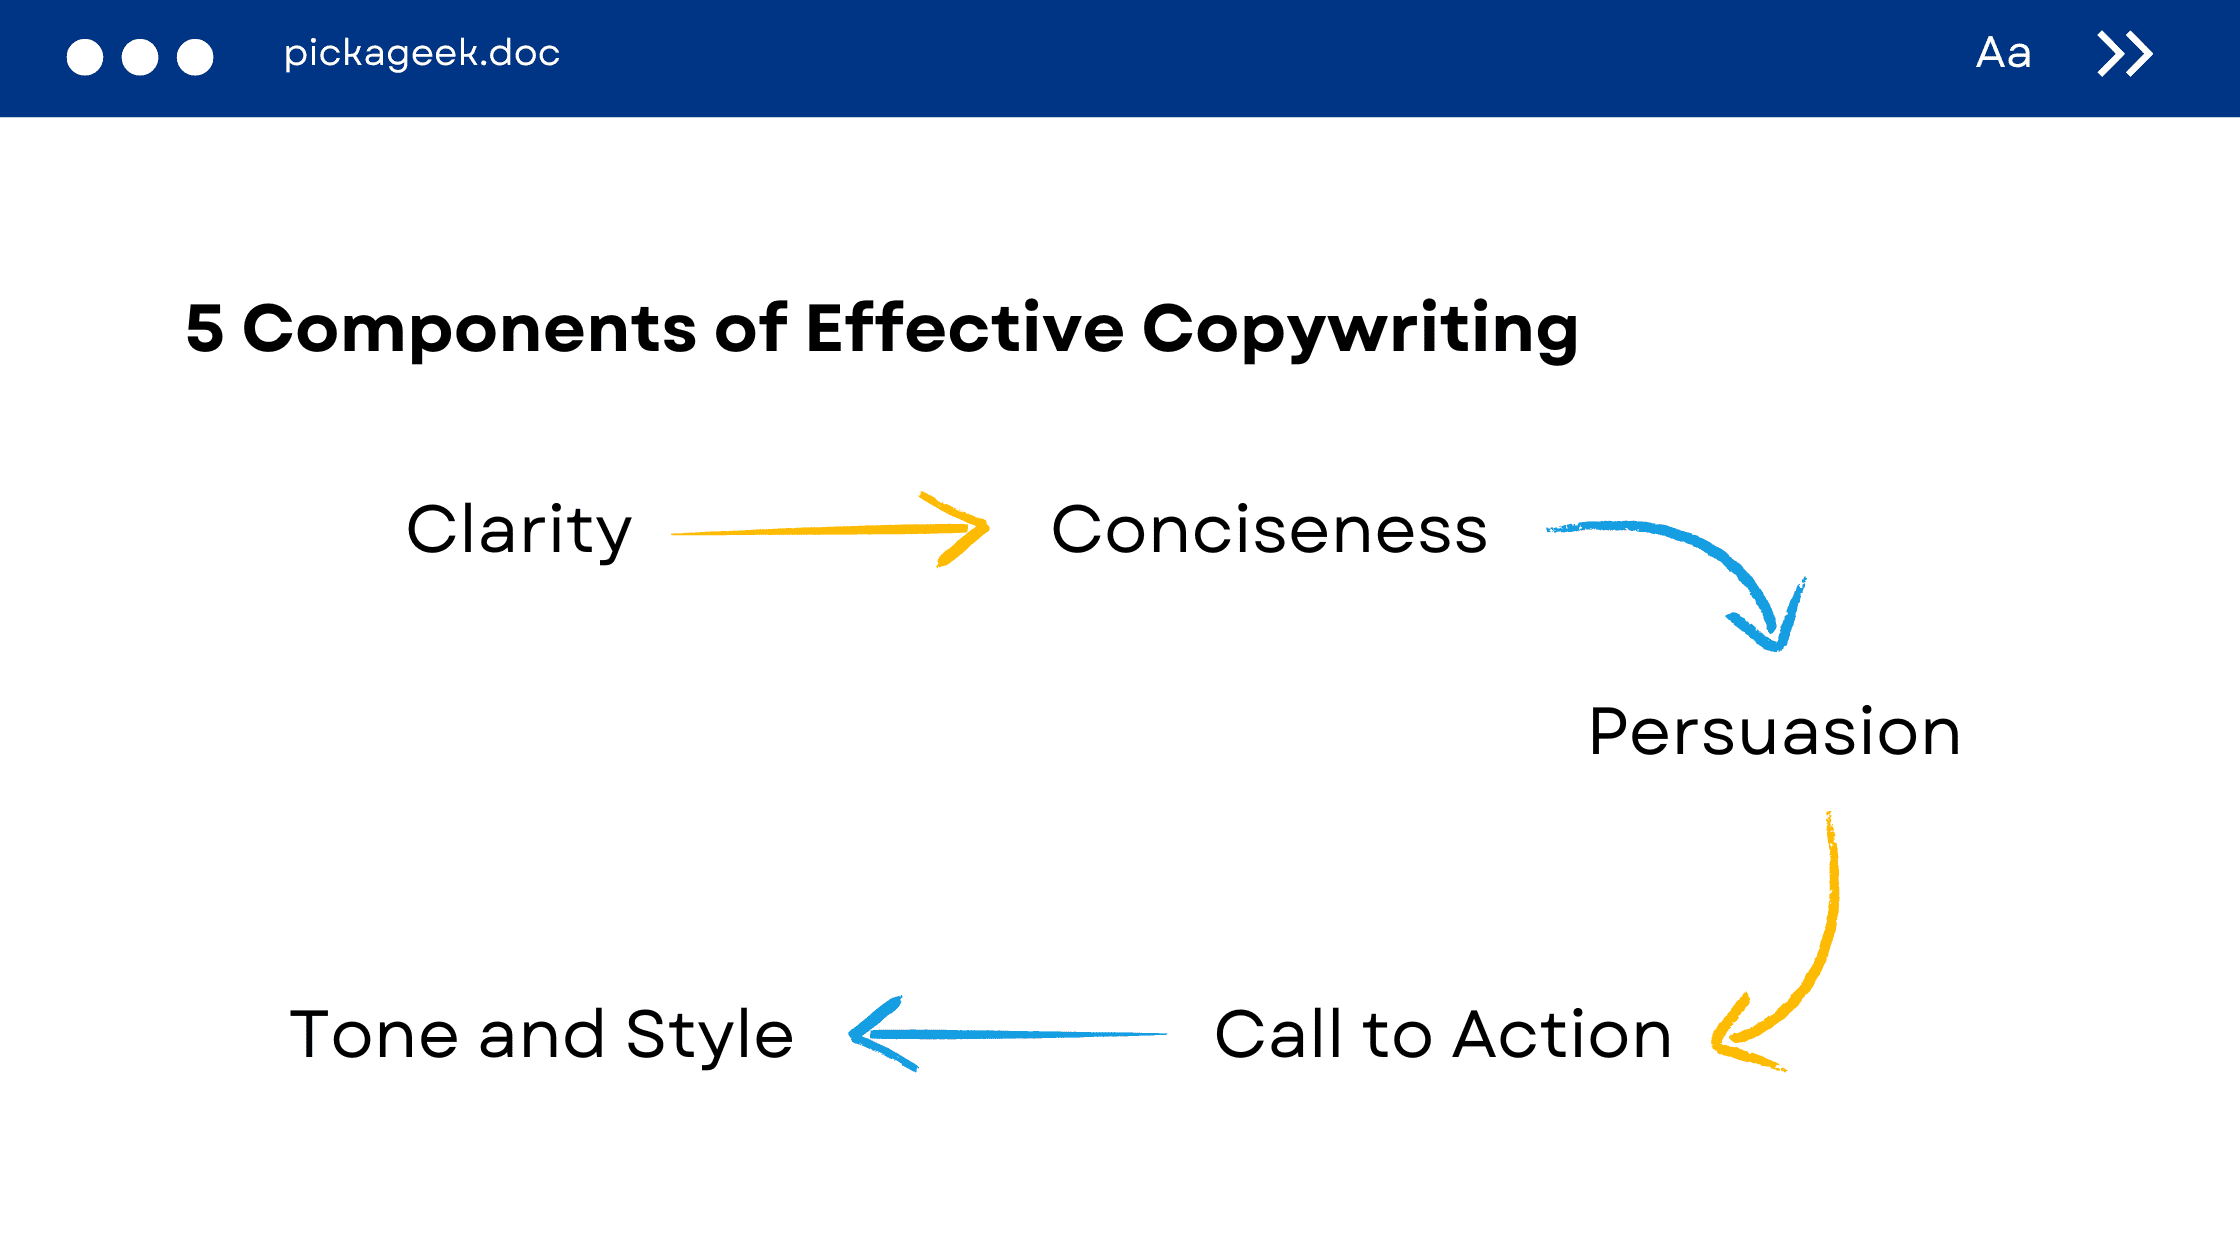 5 Components of Effective Copywriting